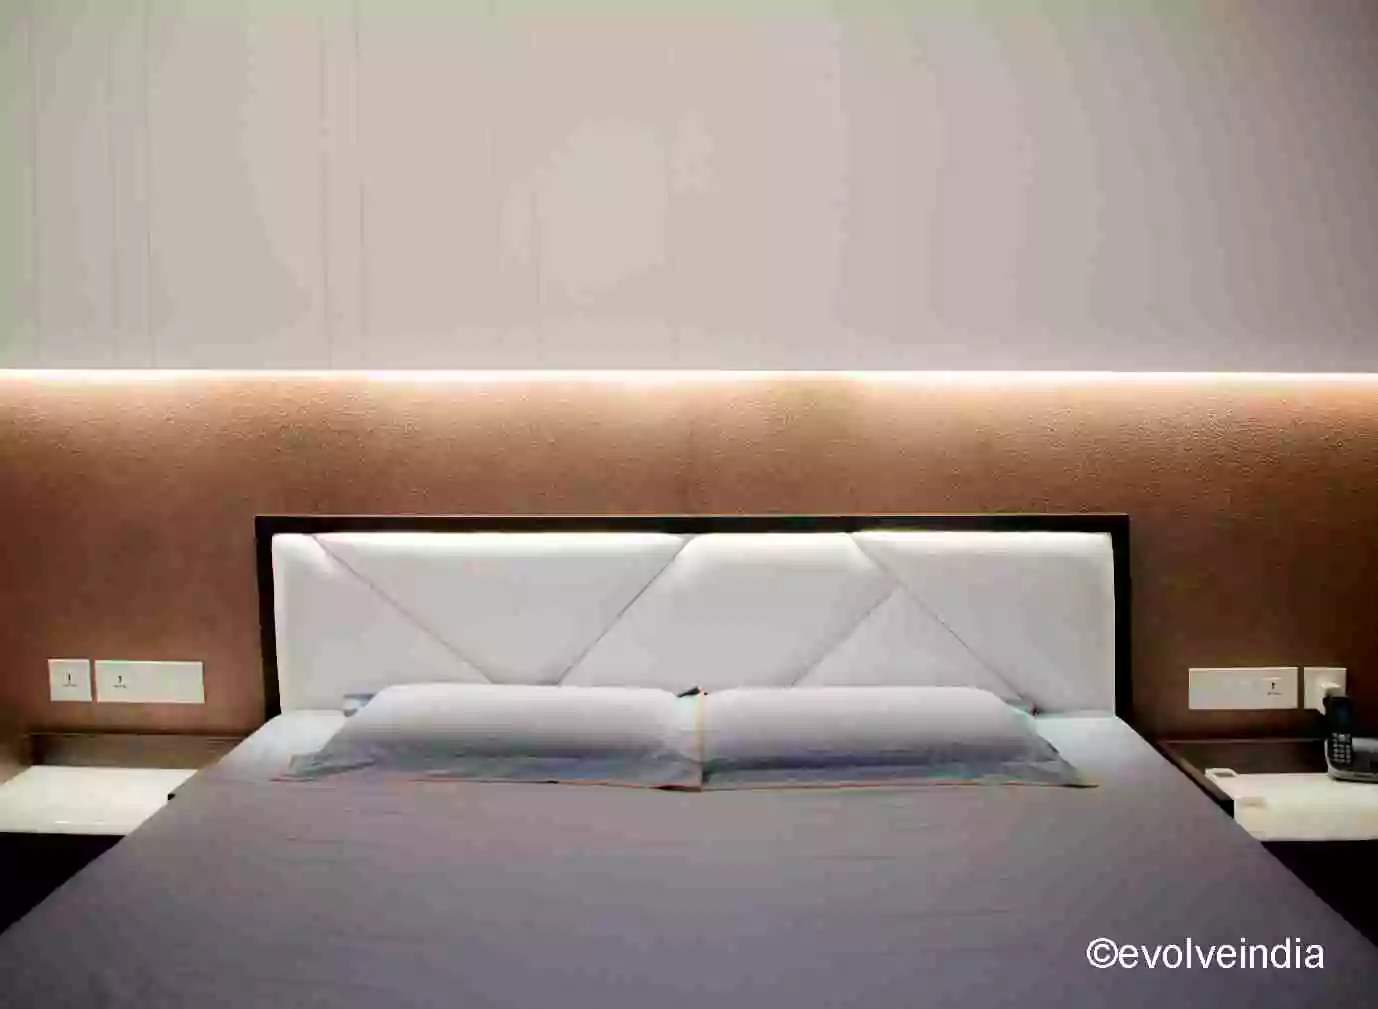 Bed back accent wall designed by Evolve India